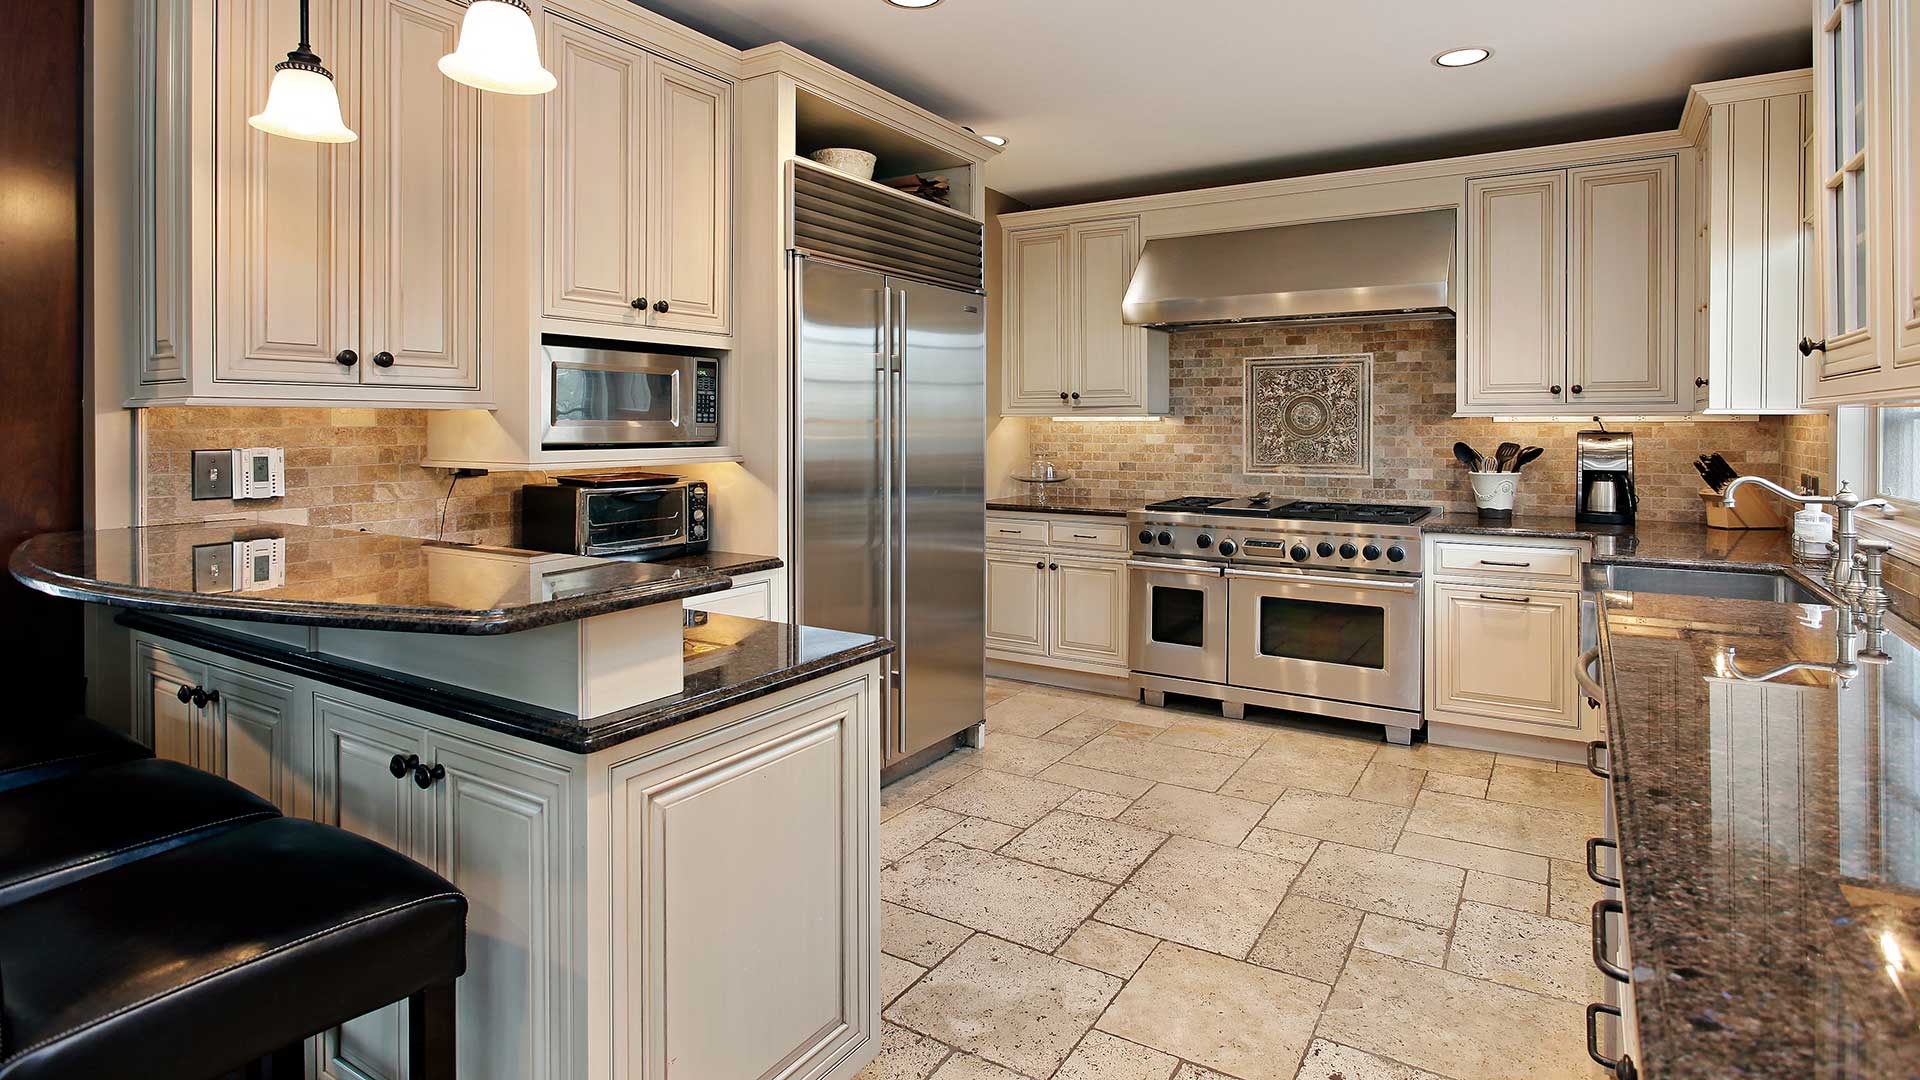 Should Kitchen Cabinets Or Flooring Be, Laminate Flooring Or Cabinets First